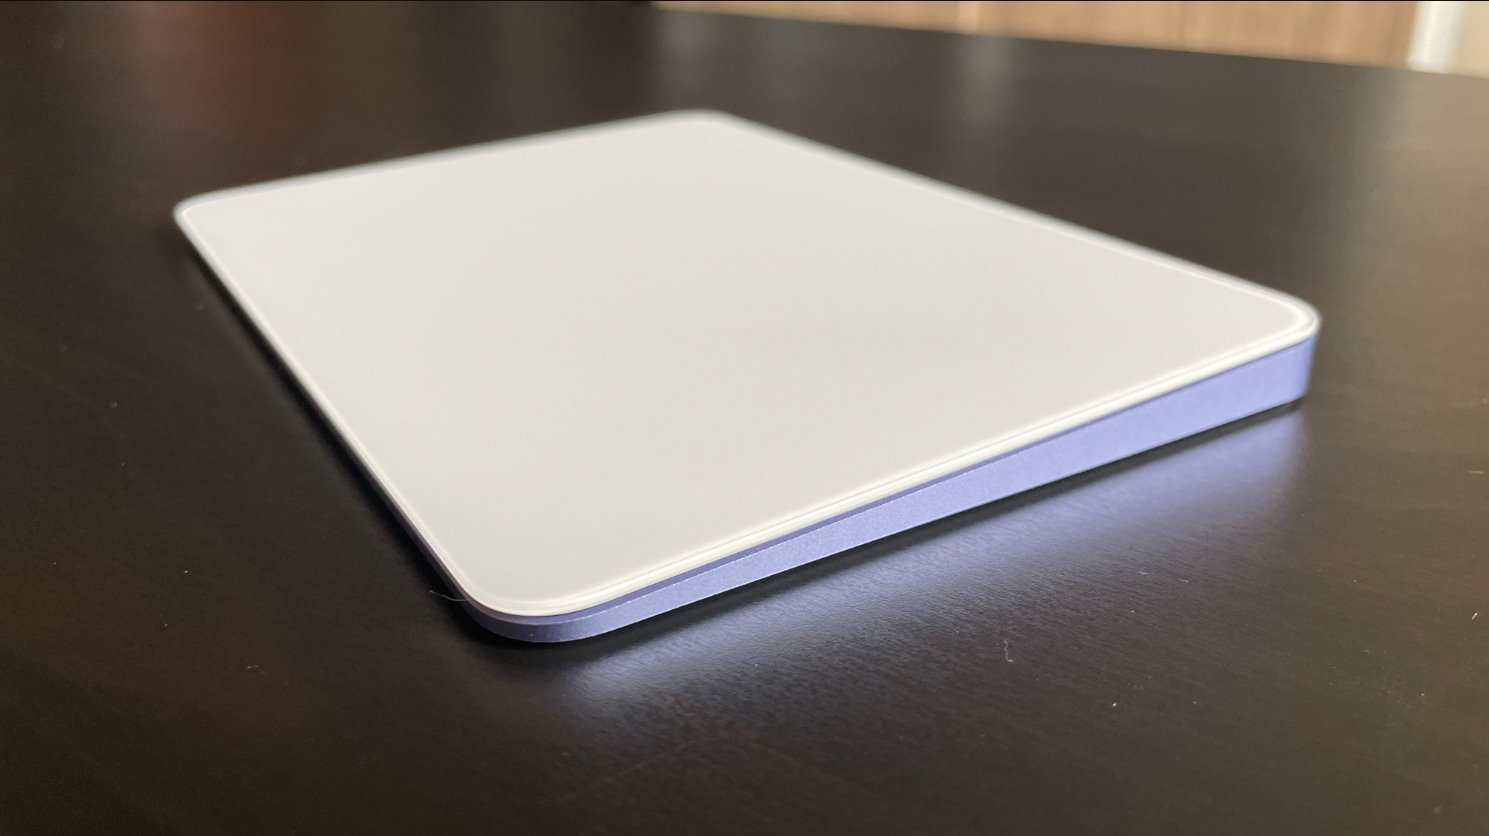 What Is Magic Trackpad